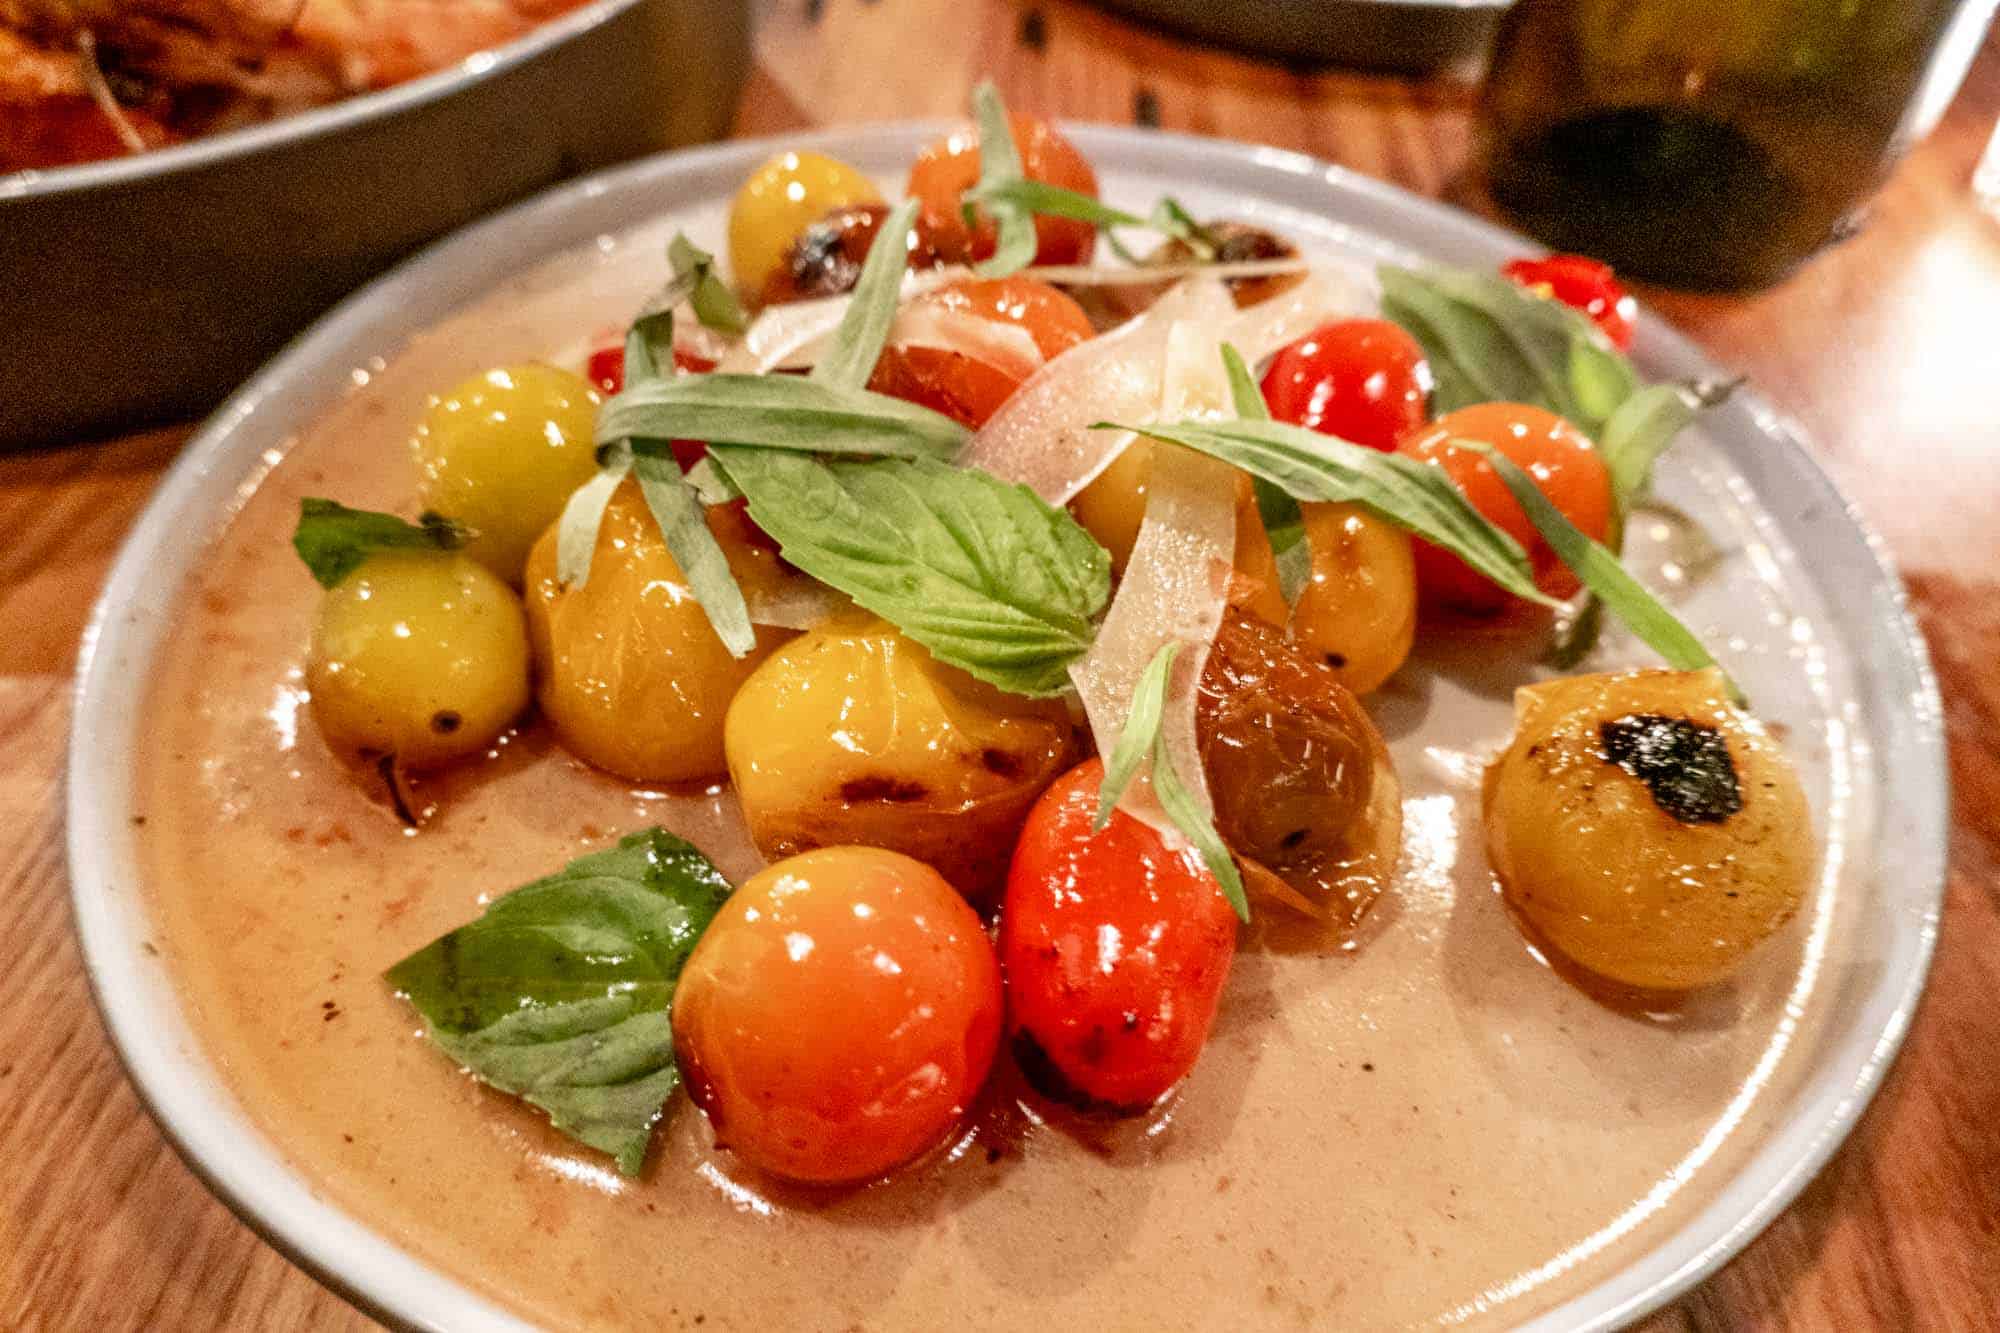 Plate of cherry tomatoes and basil